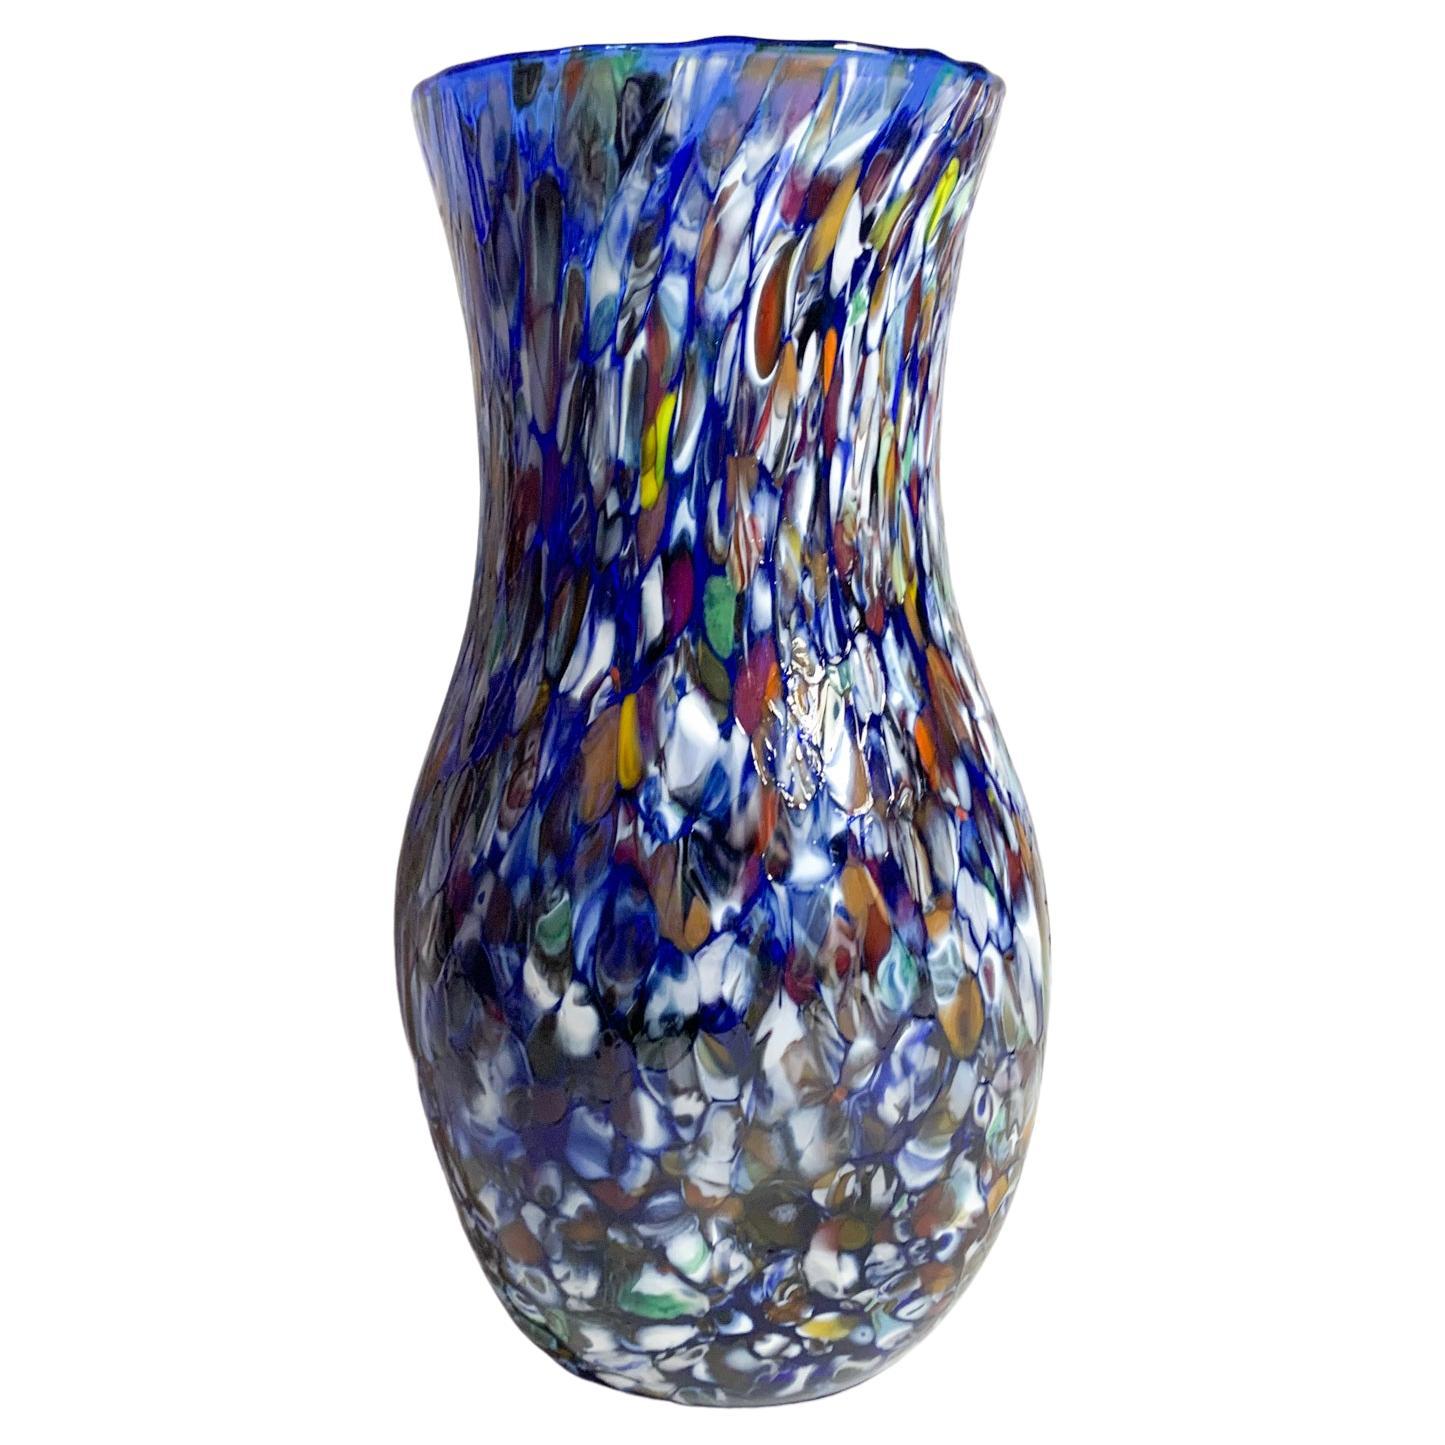 Italian Vase in Blue Murano Glass with Murrine by Fratelli Toso from the 1940s